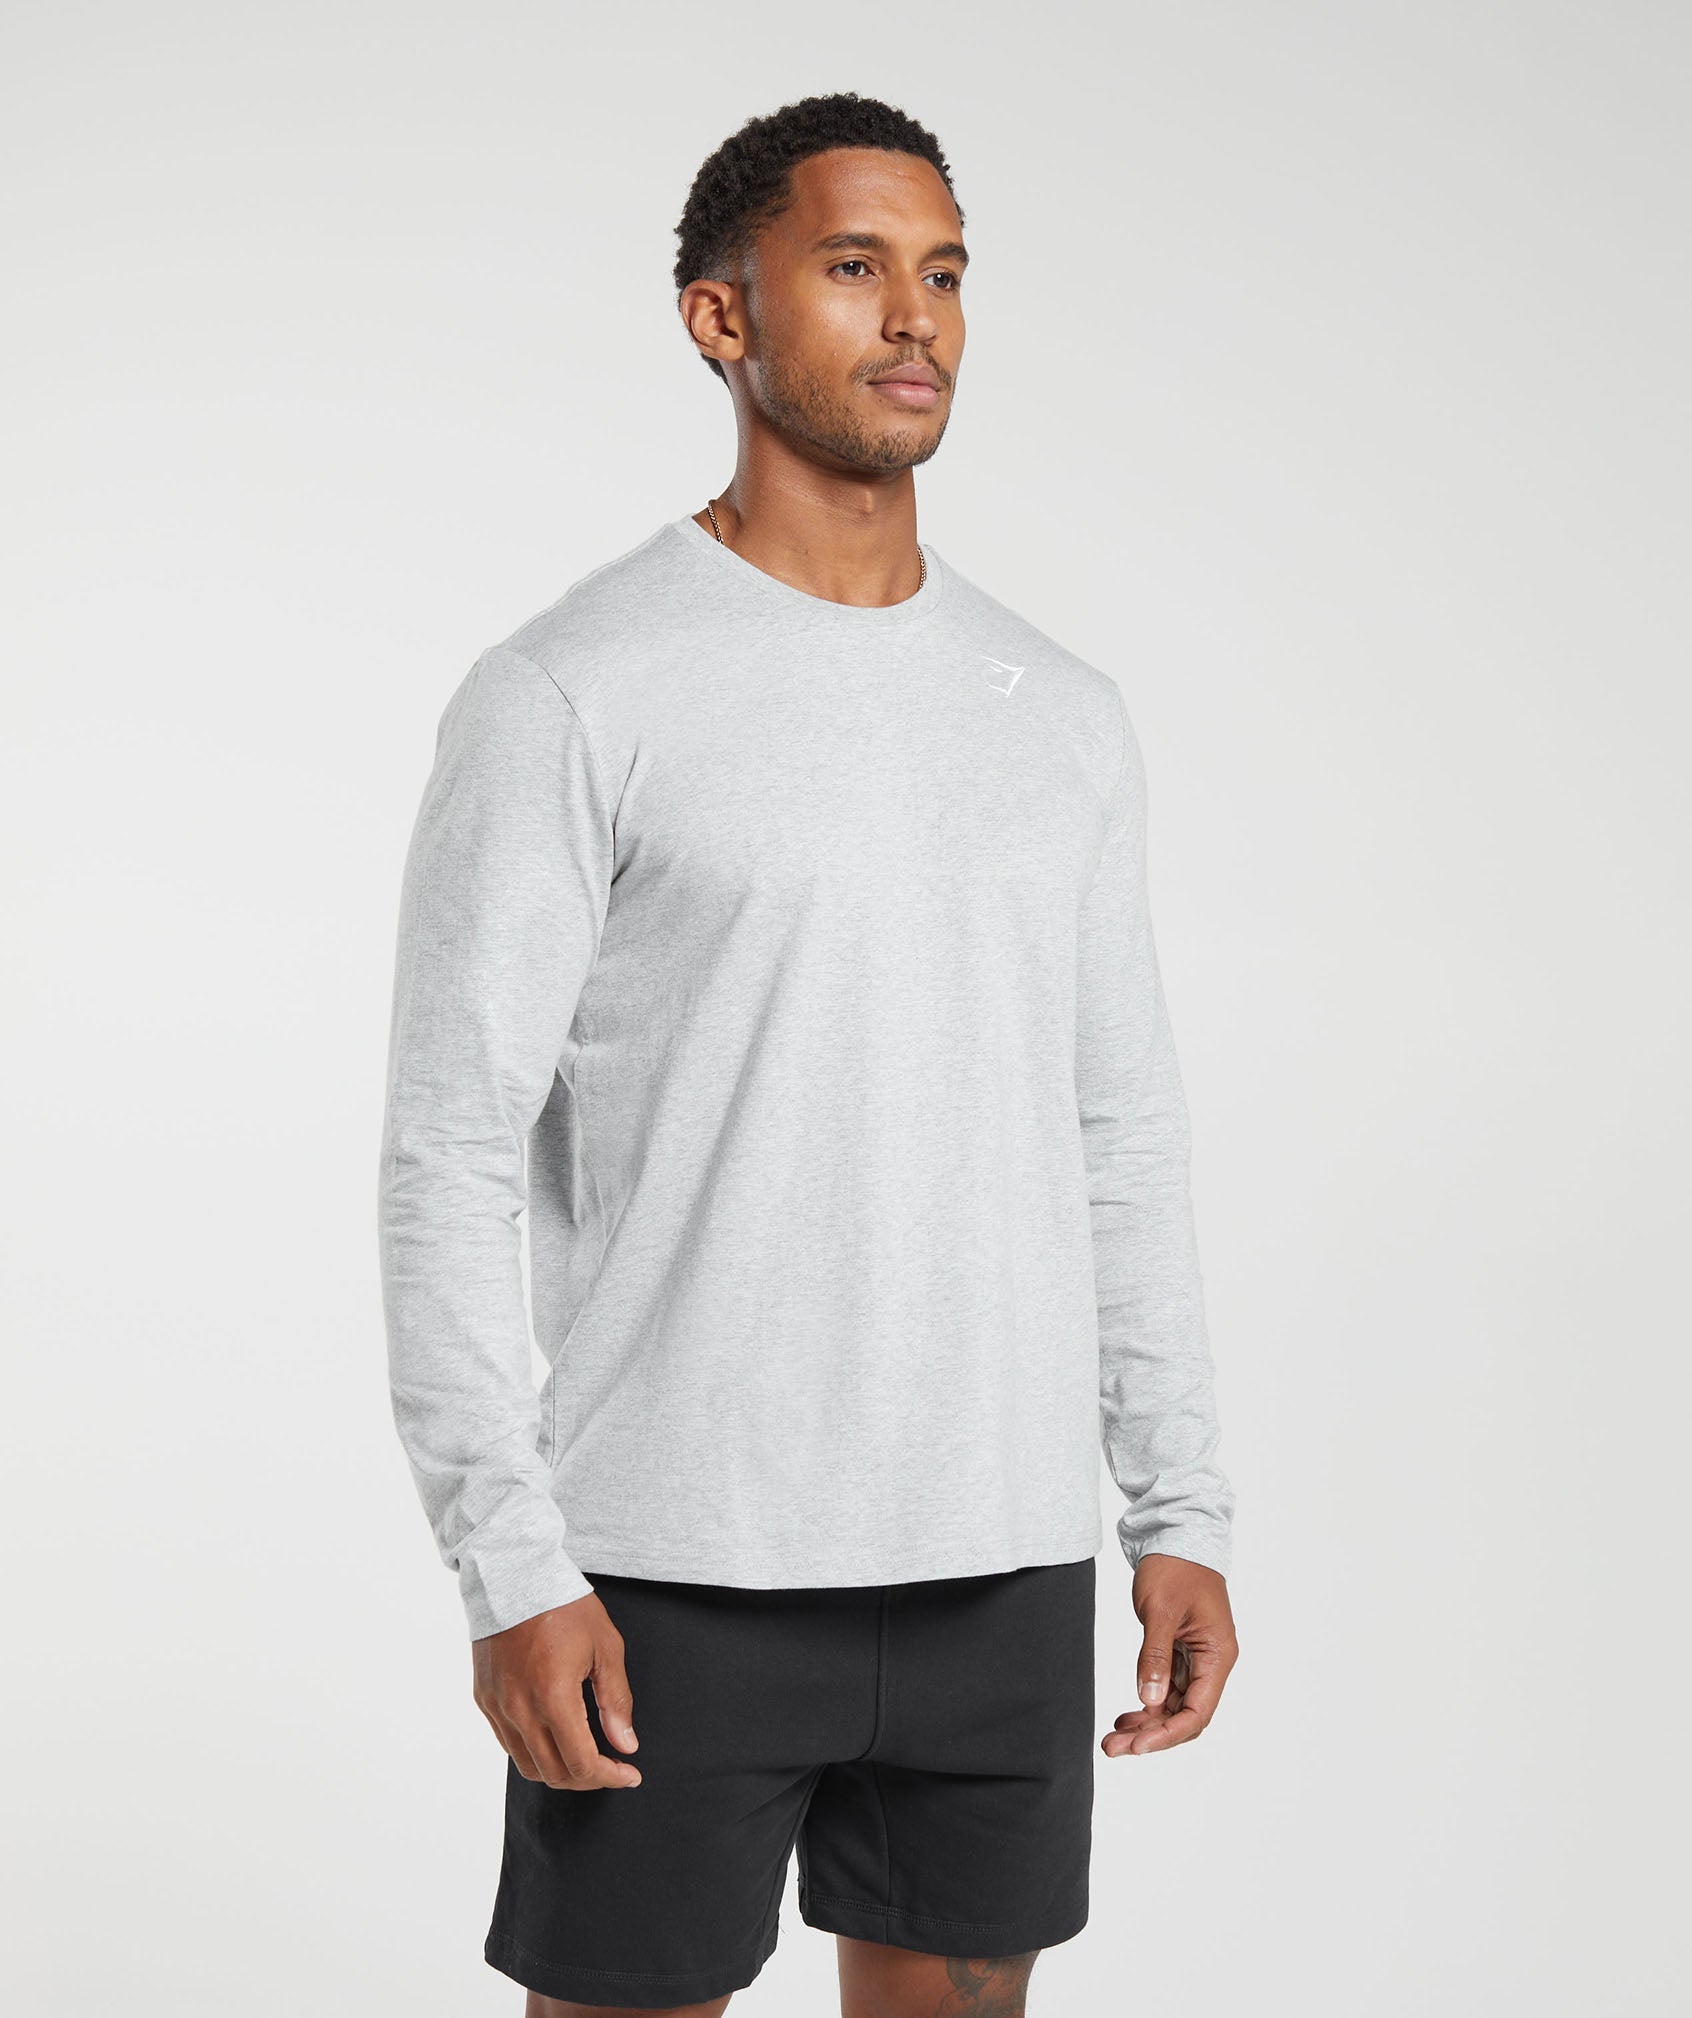 Crest Long Sleeve T-Shirt in Light Grey Marl - view 3